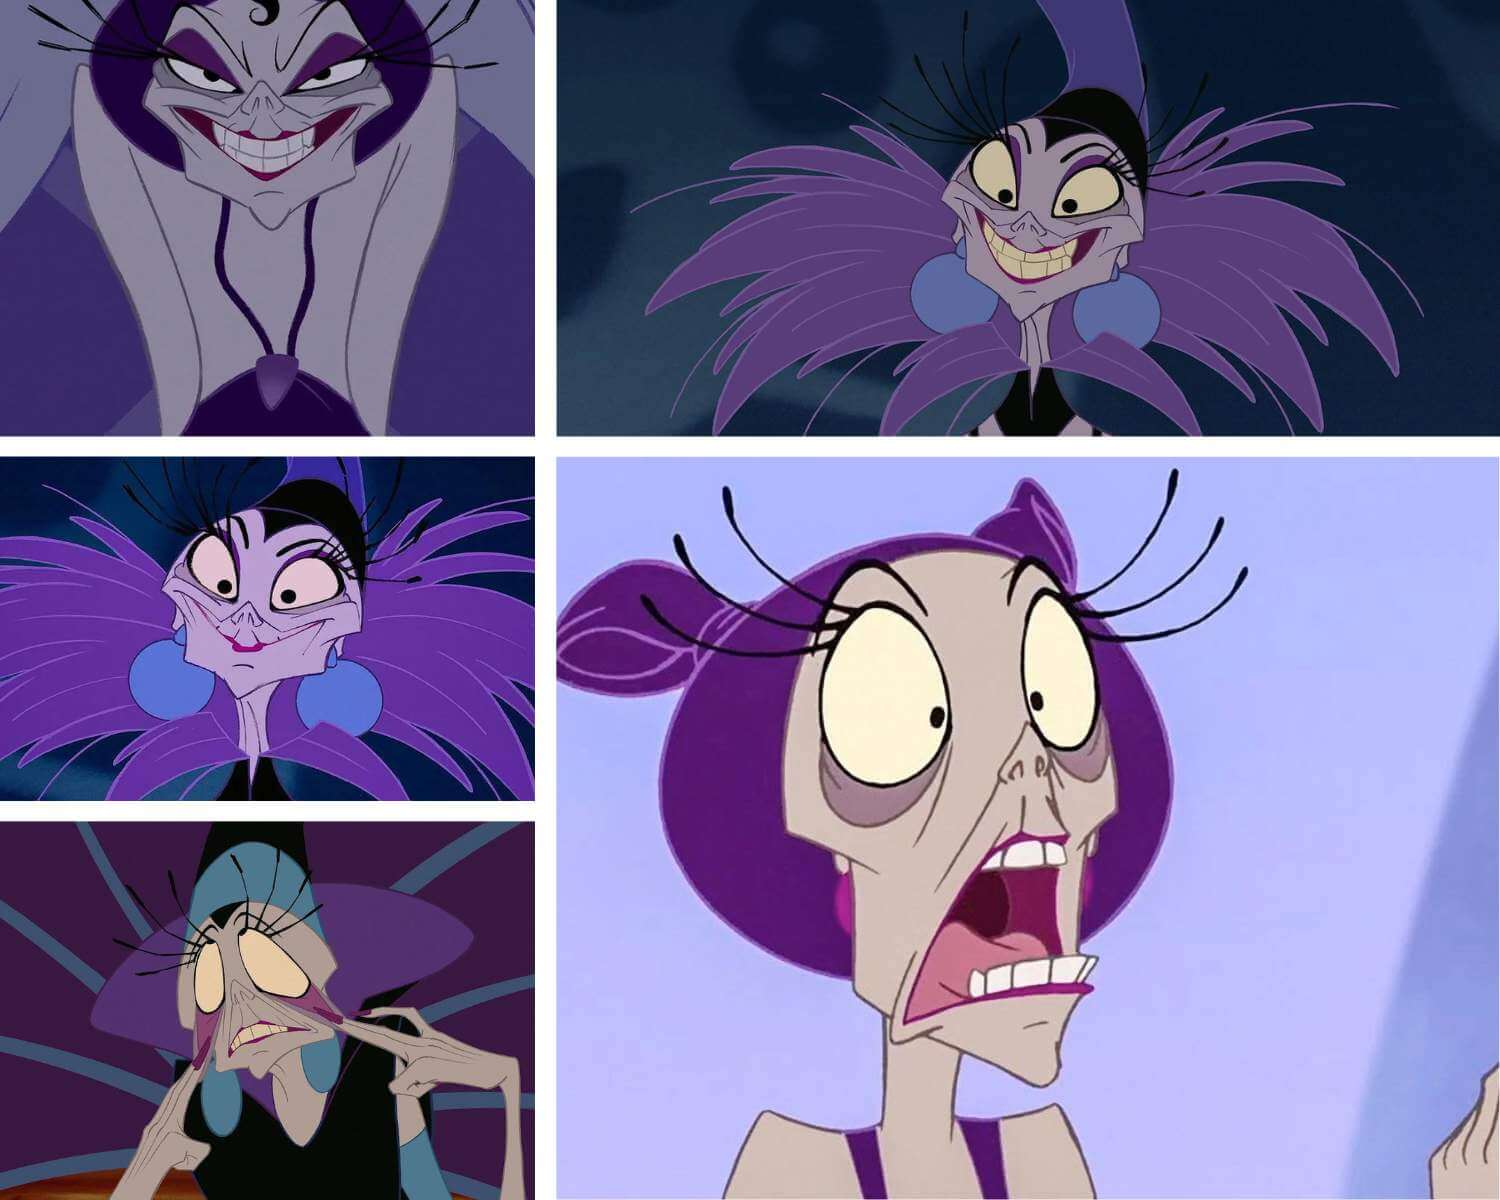 Yzma's Role in The Emperor's New Groove